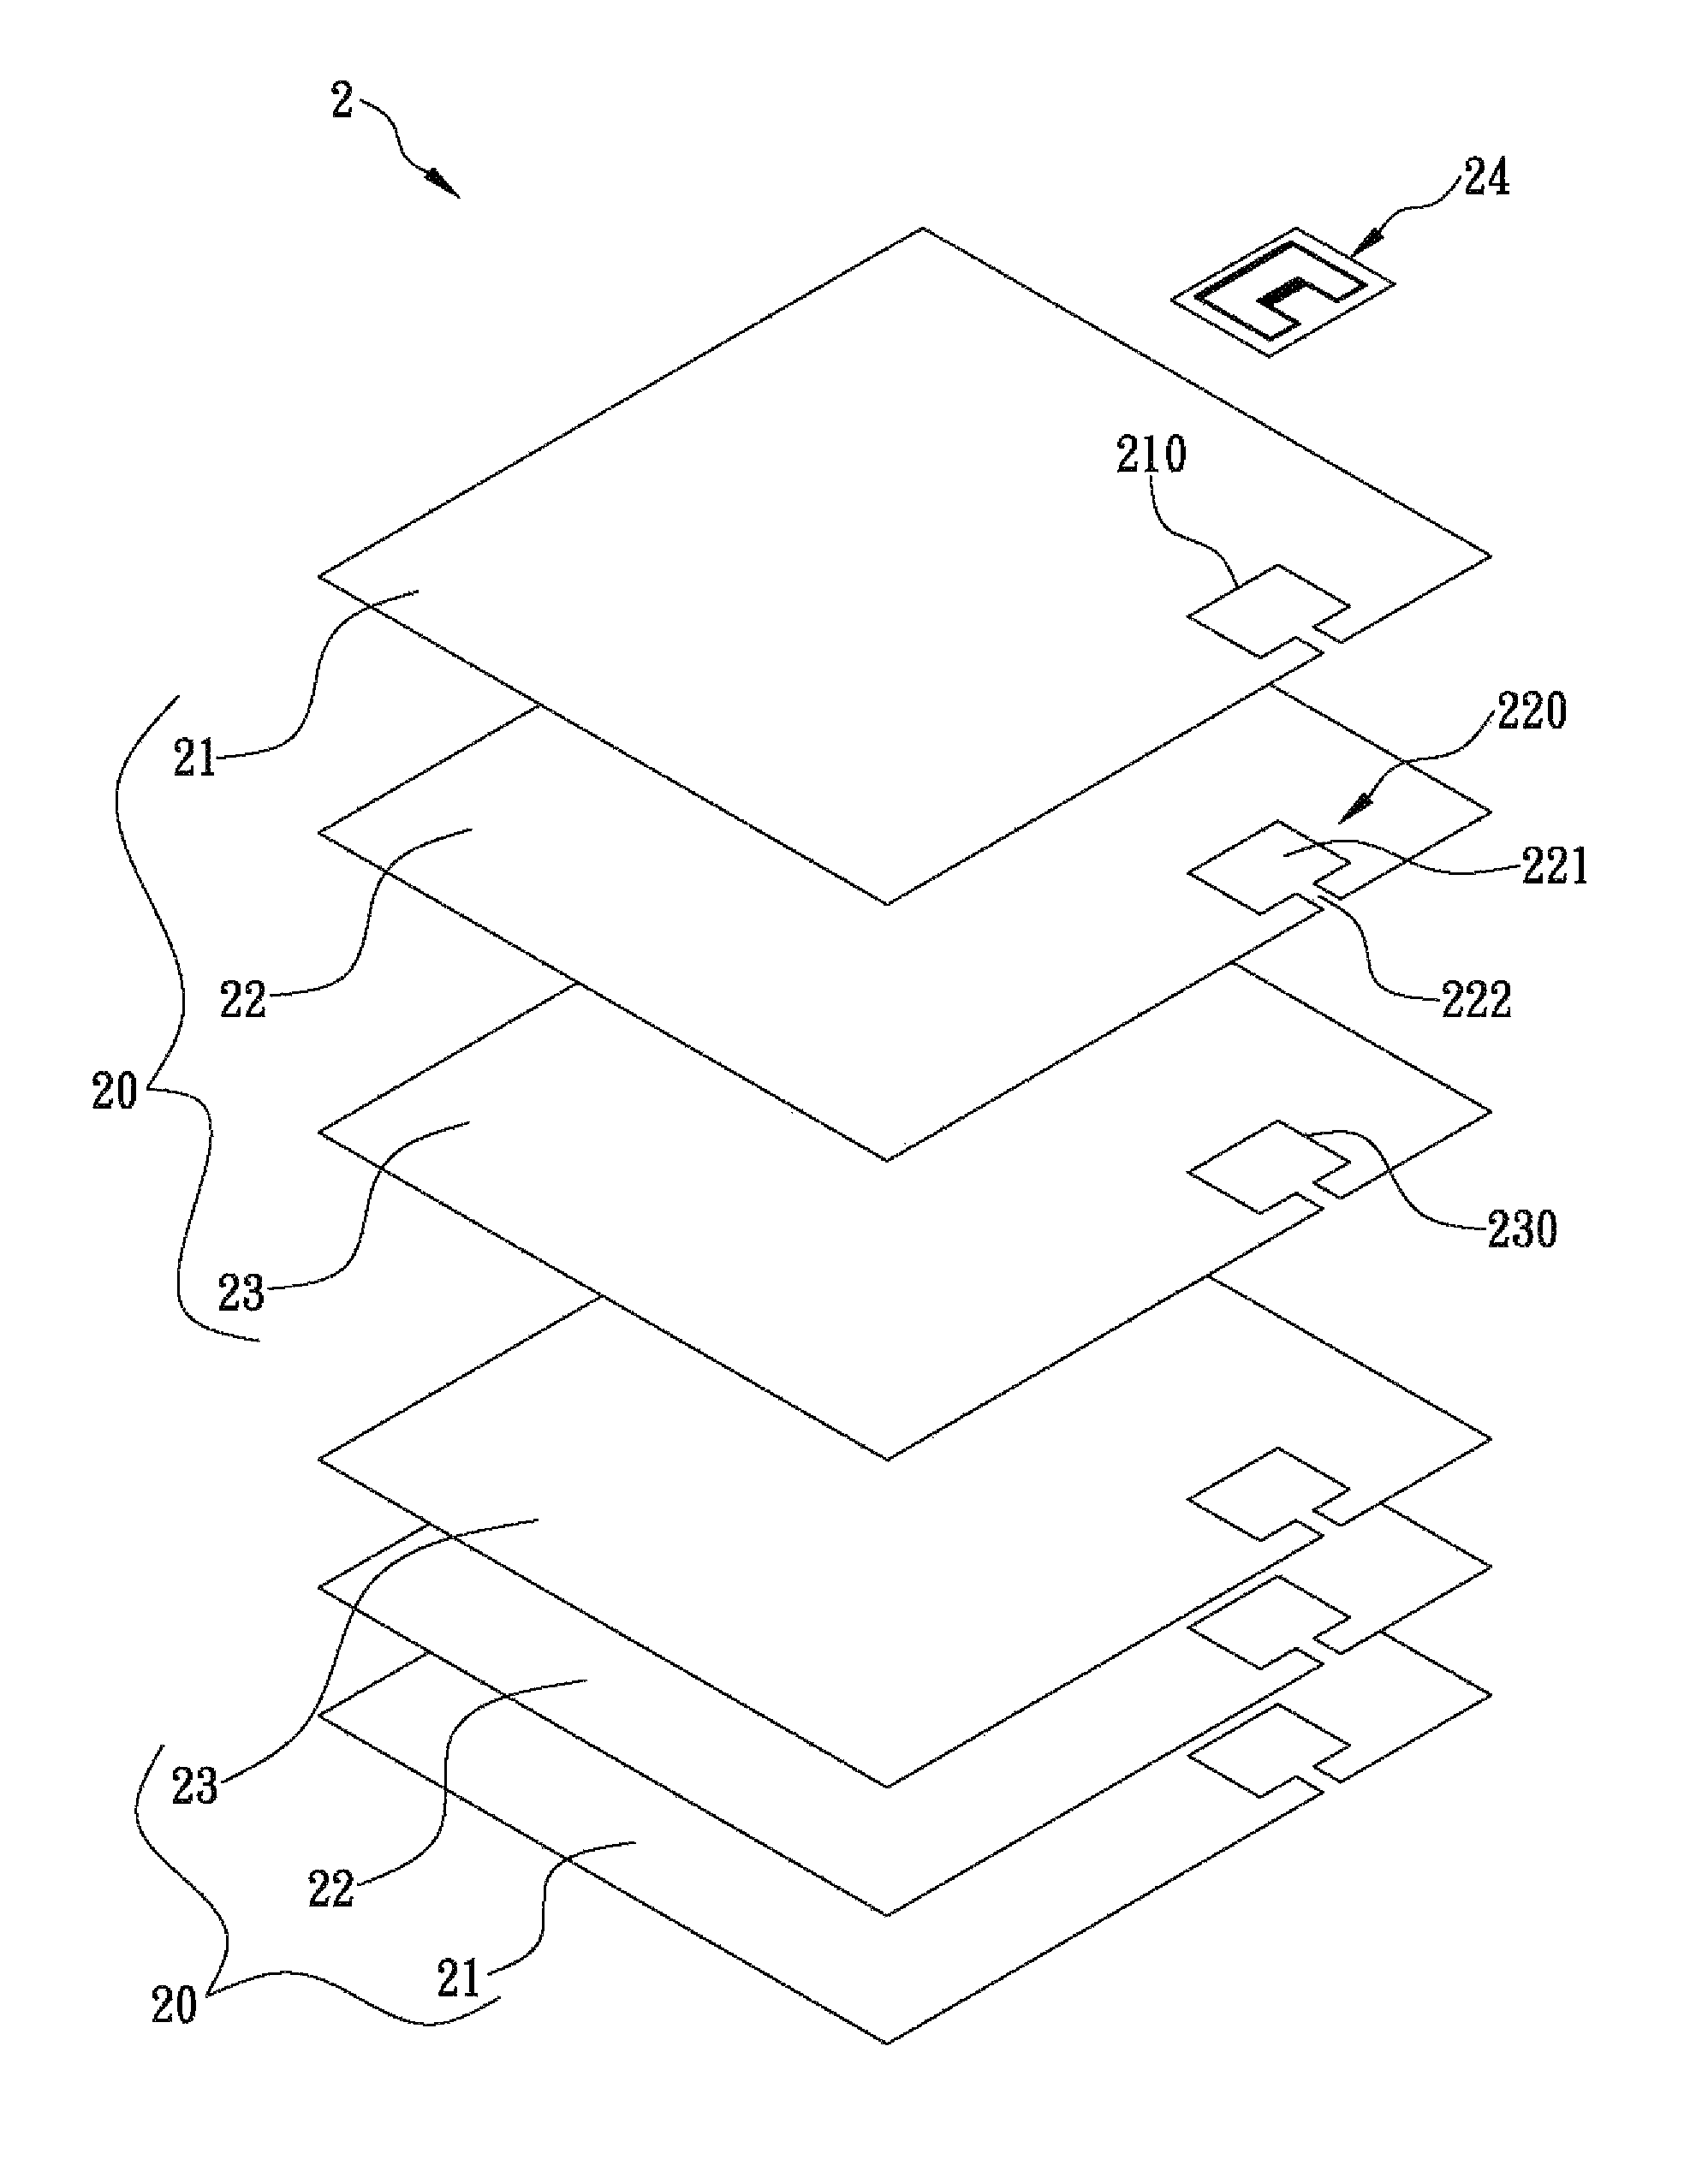 Package bag with externally attached communication device